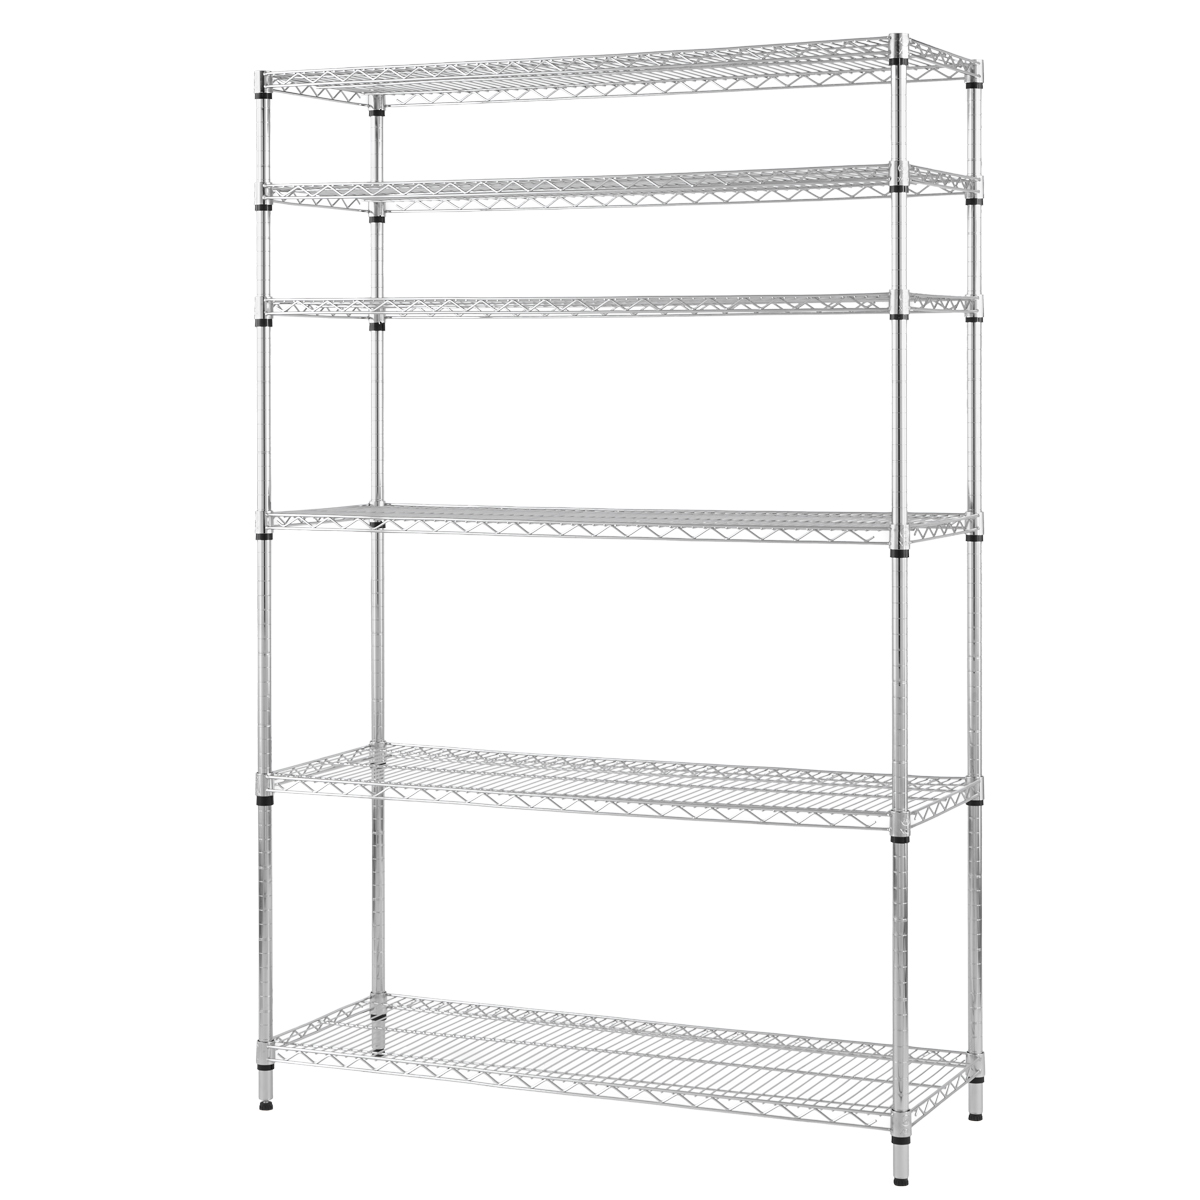 Metal Shelving: Construction, Types, Benefits, and Functions